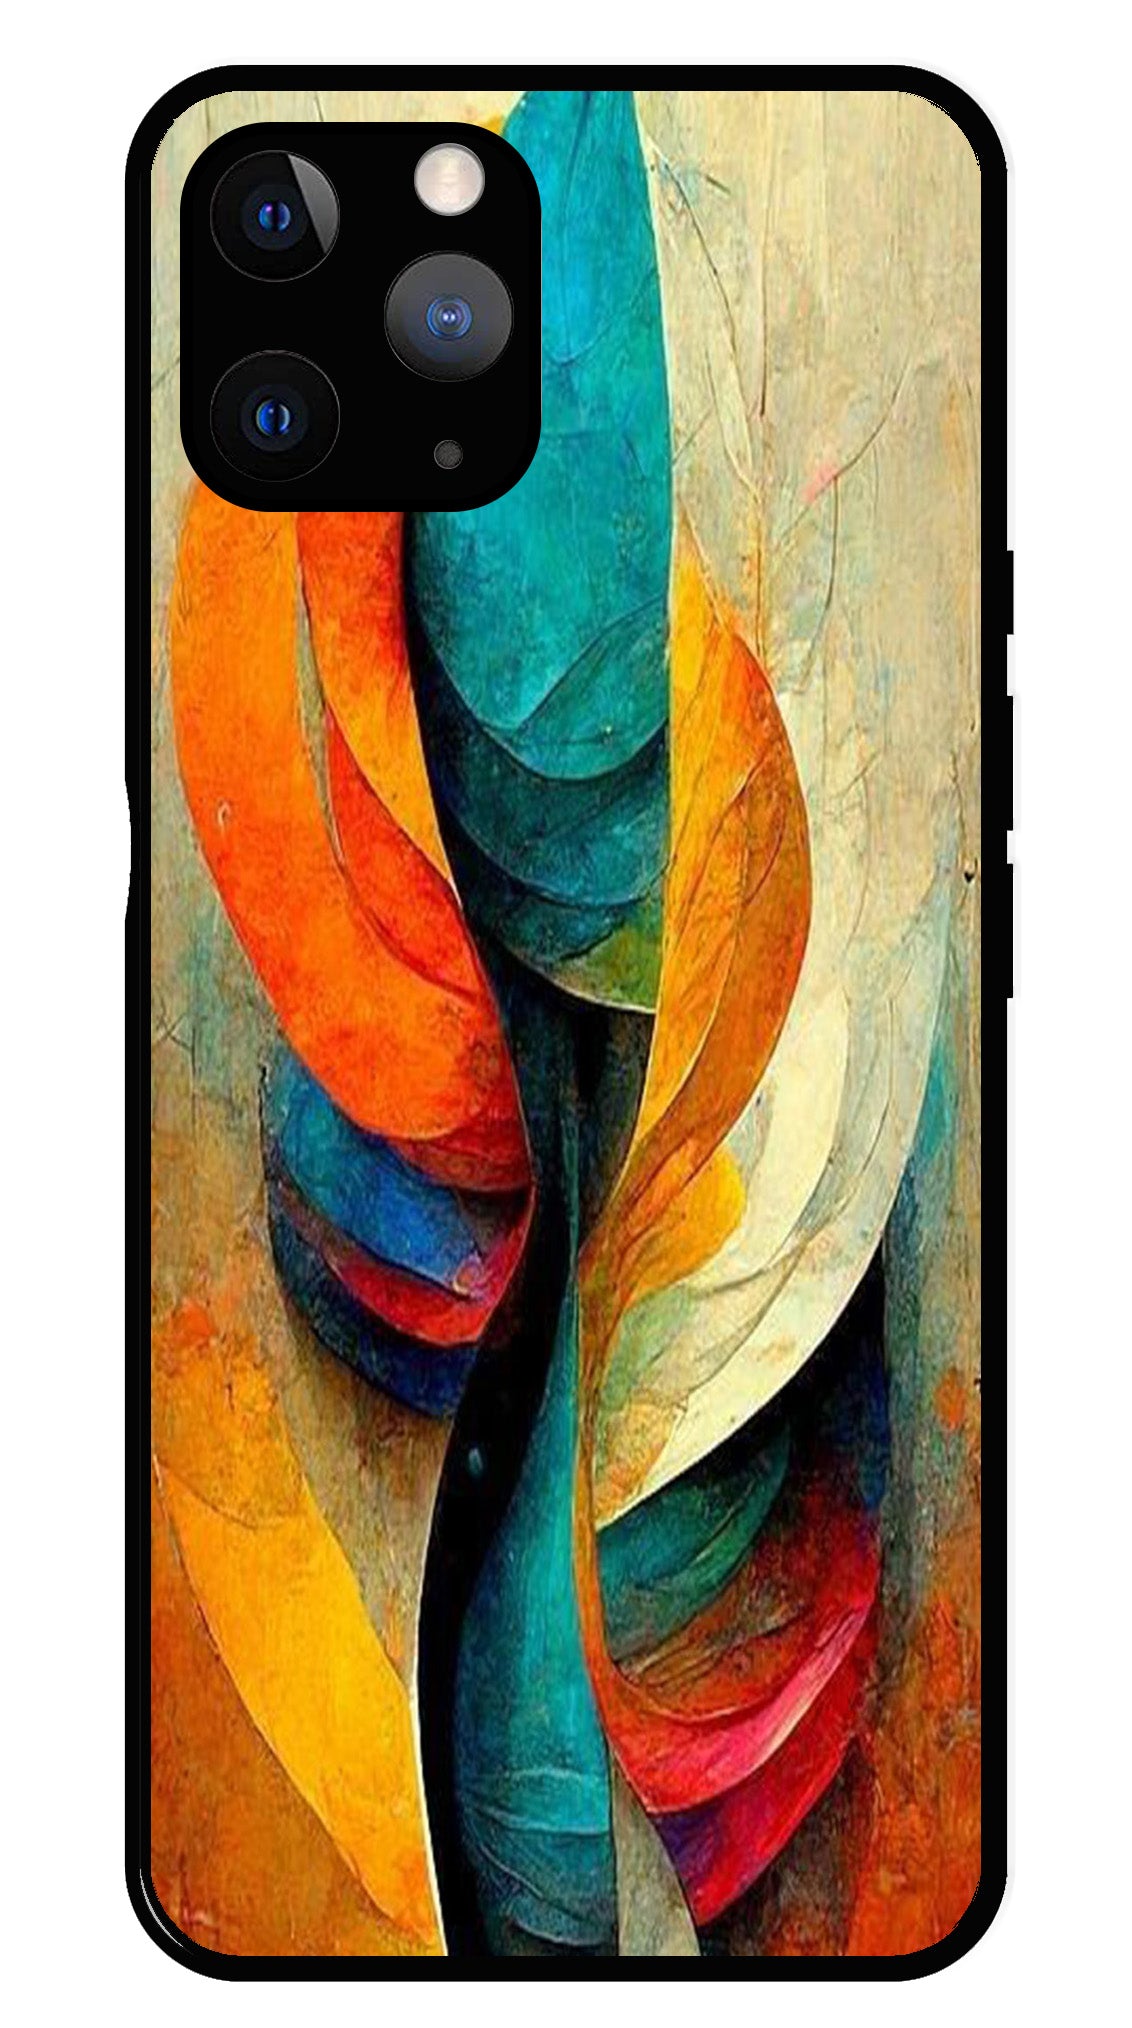 Modern Art Metal Mobile Case for iPhone 11 Pro Max